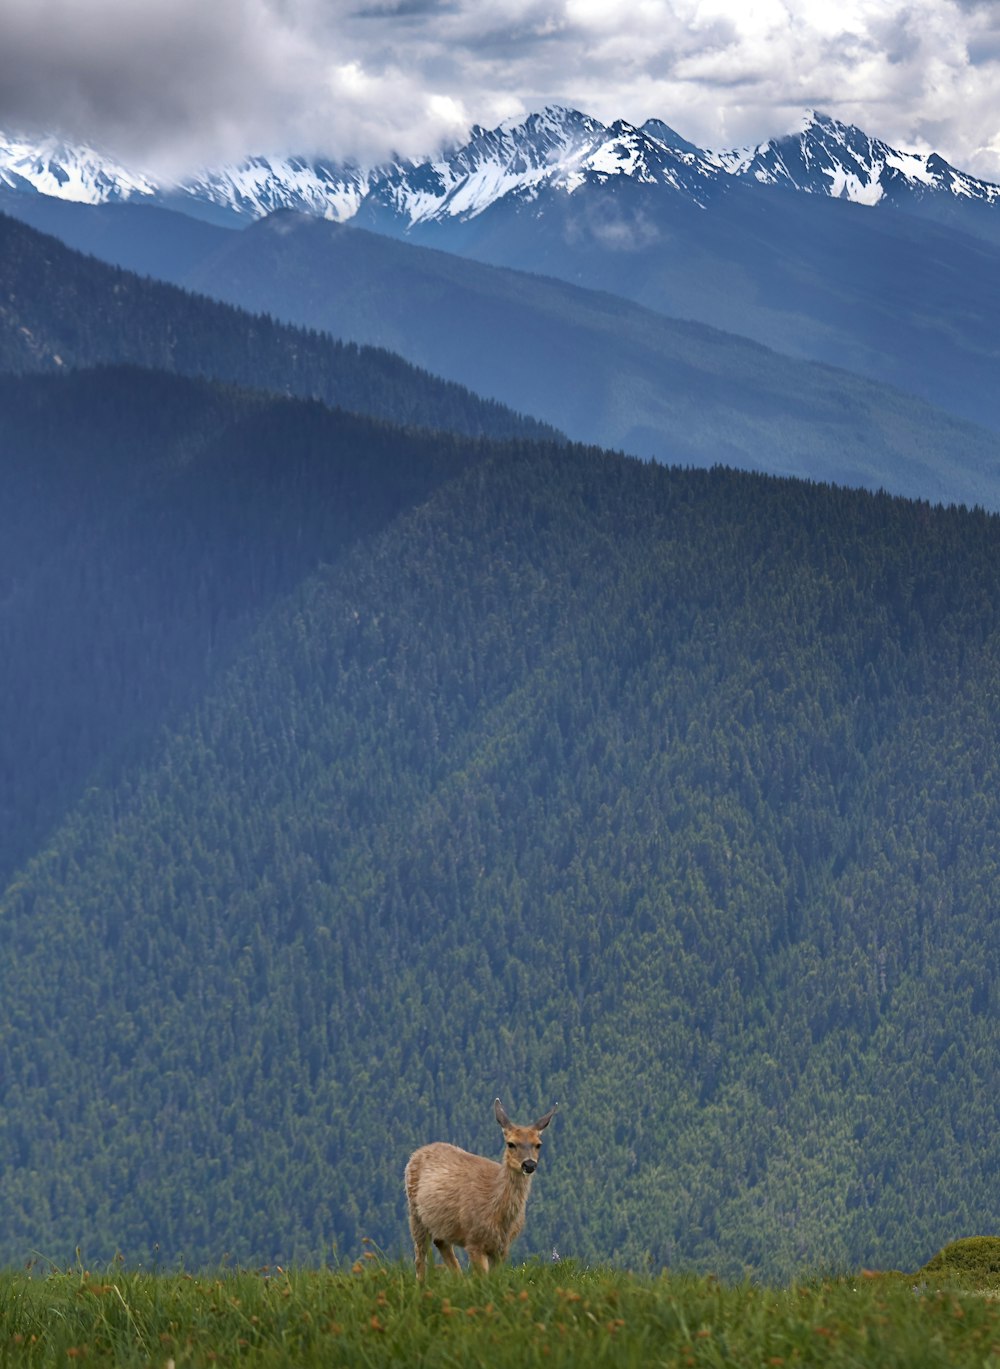 brown deer in green field viewing mountain under blue and white skies